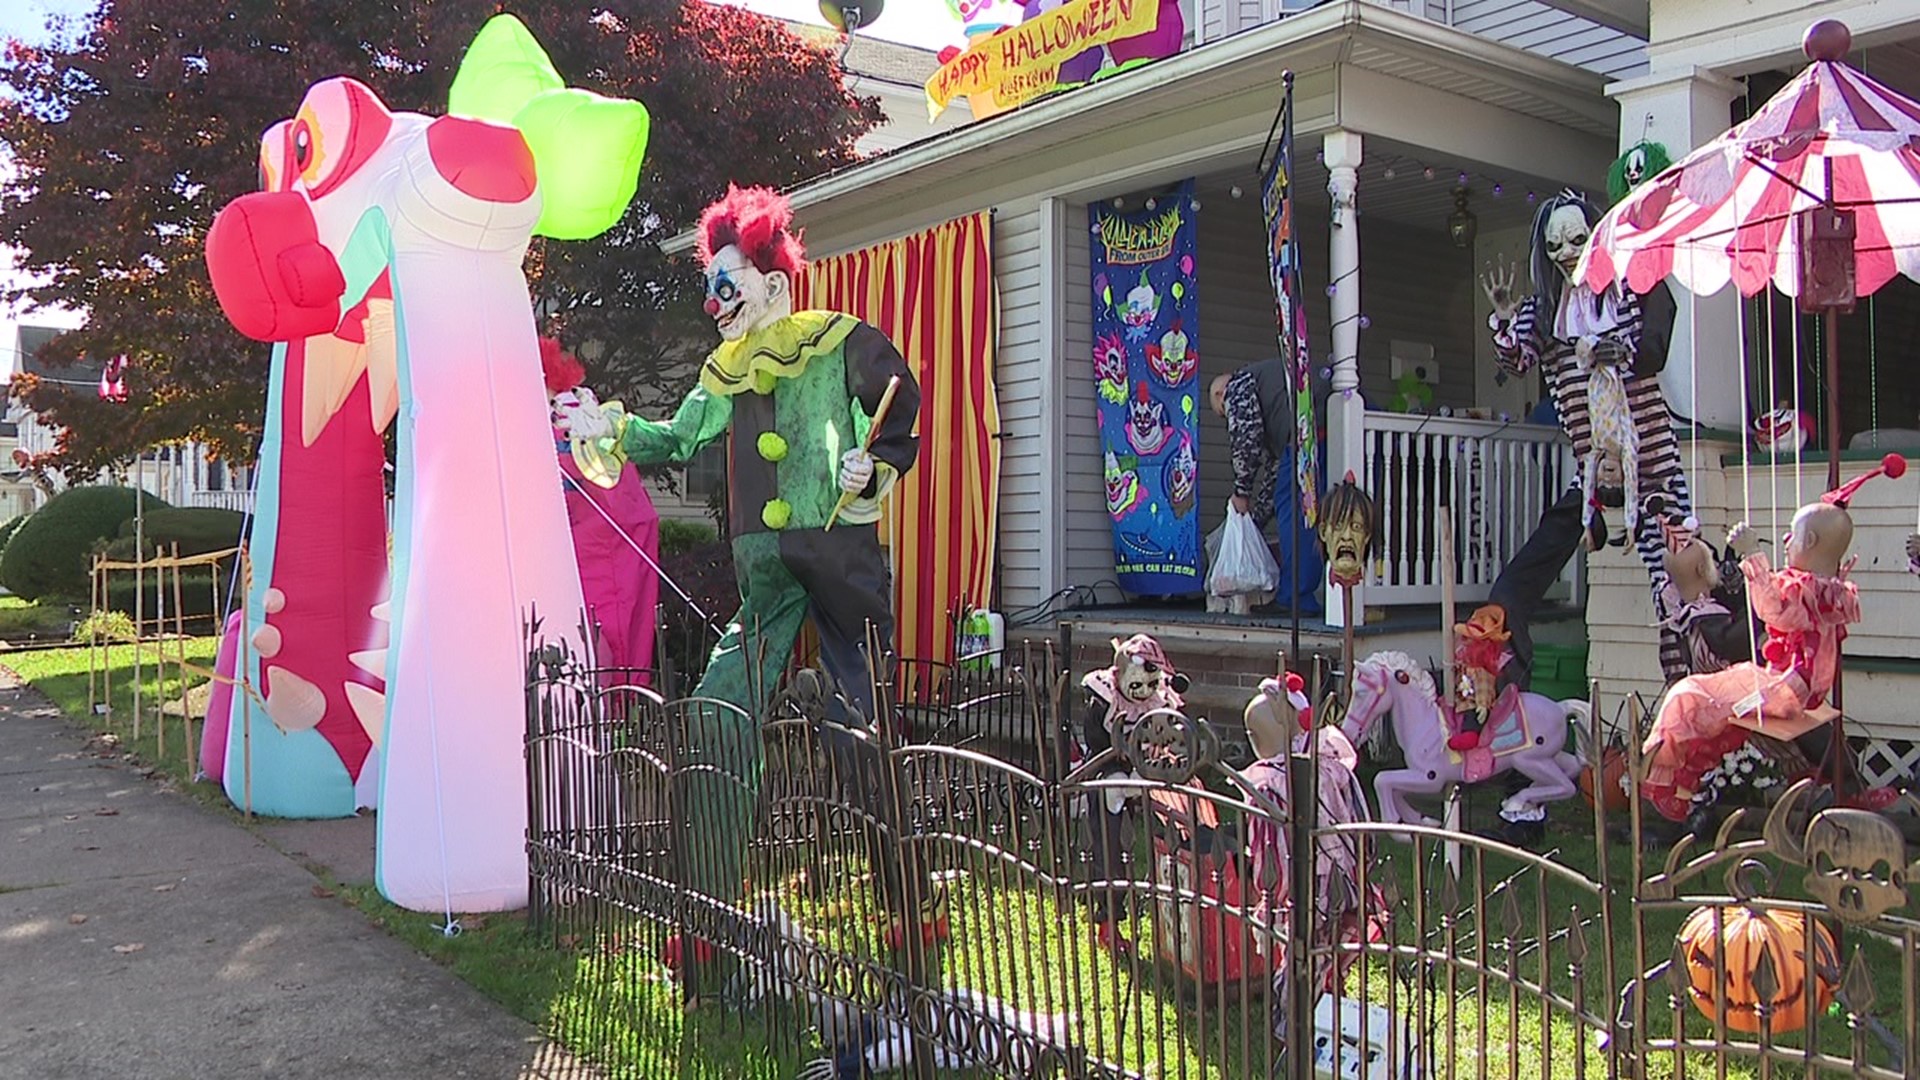 One neighborhood in Luzerne County is expecting thousands of guests this Halloween night, not only for candy but for a bit of nostalgia too.